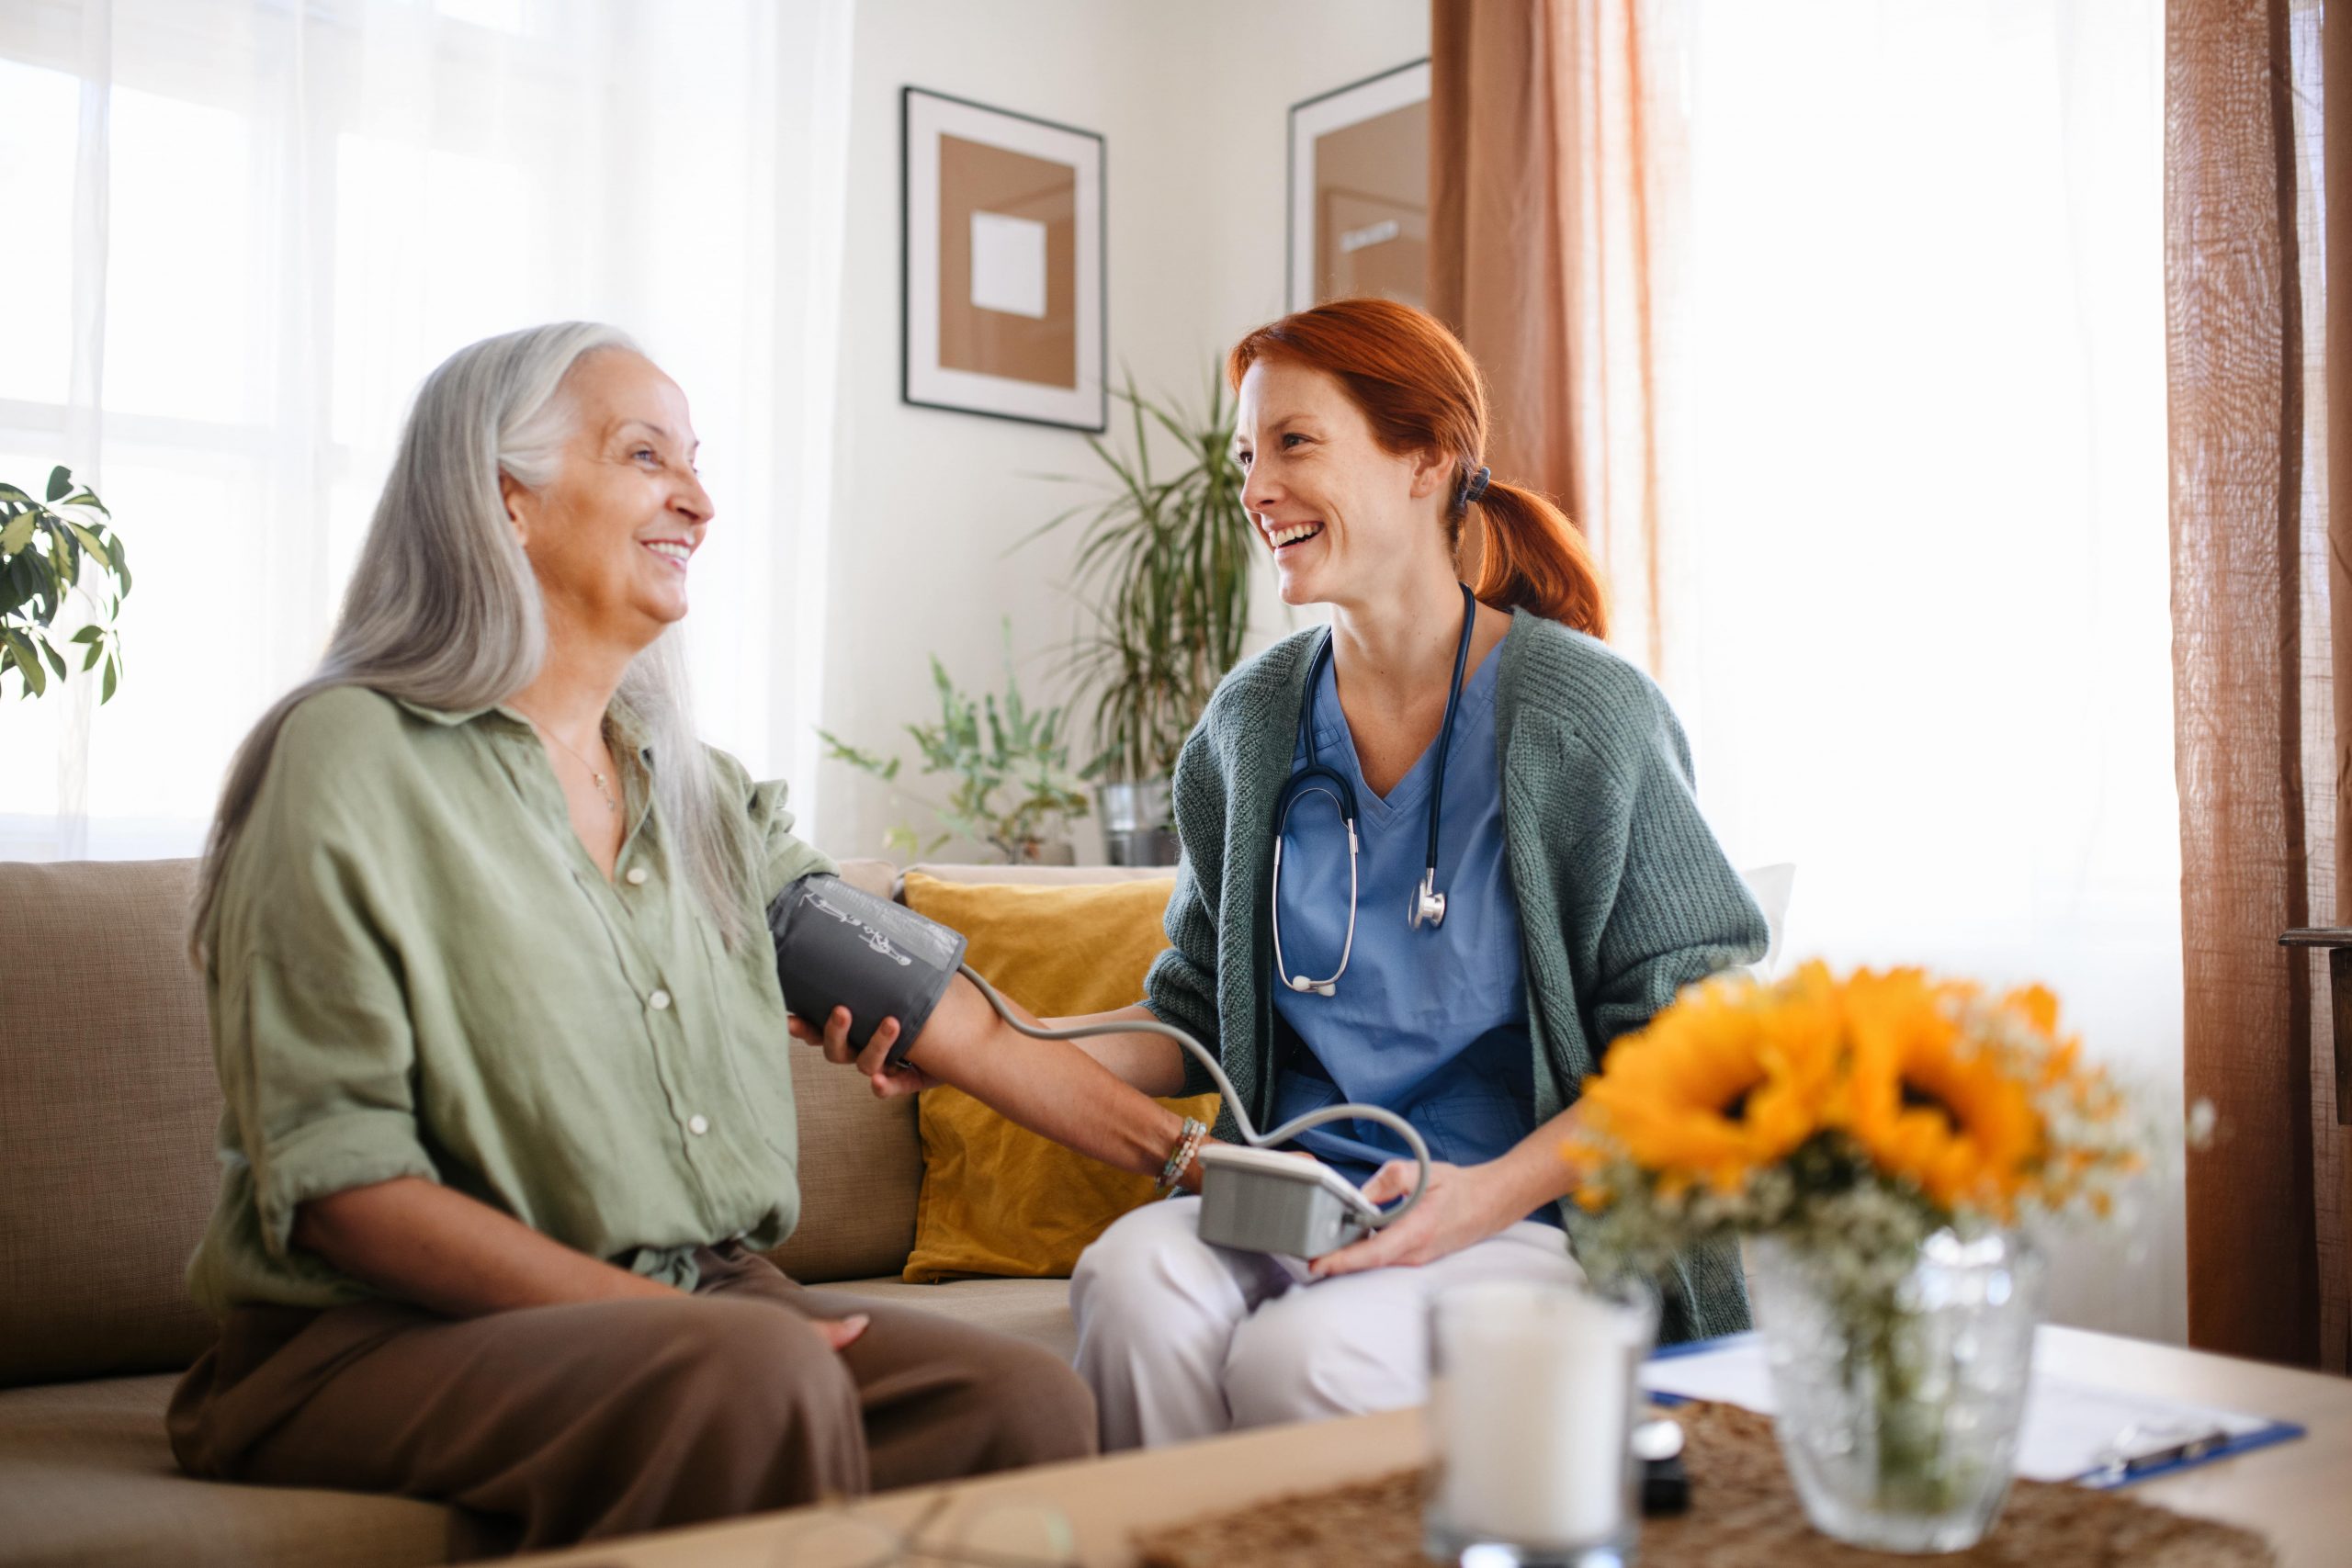 Caring For Our Elders – 5 Tips For Caring For Your Elderly Loved Ones